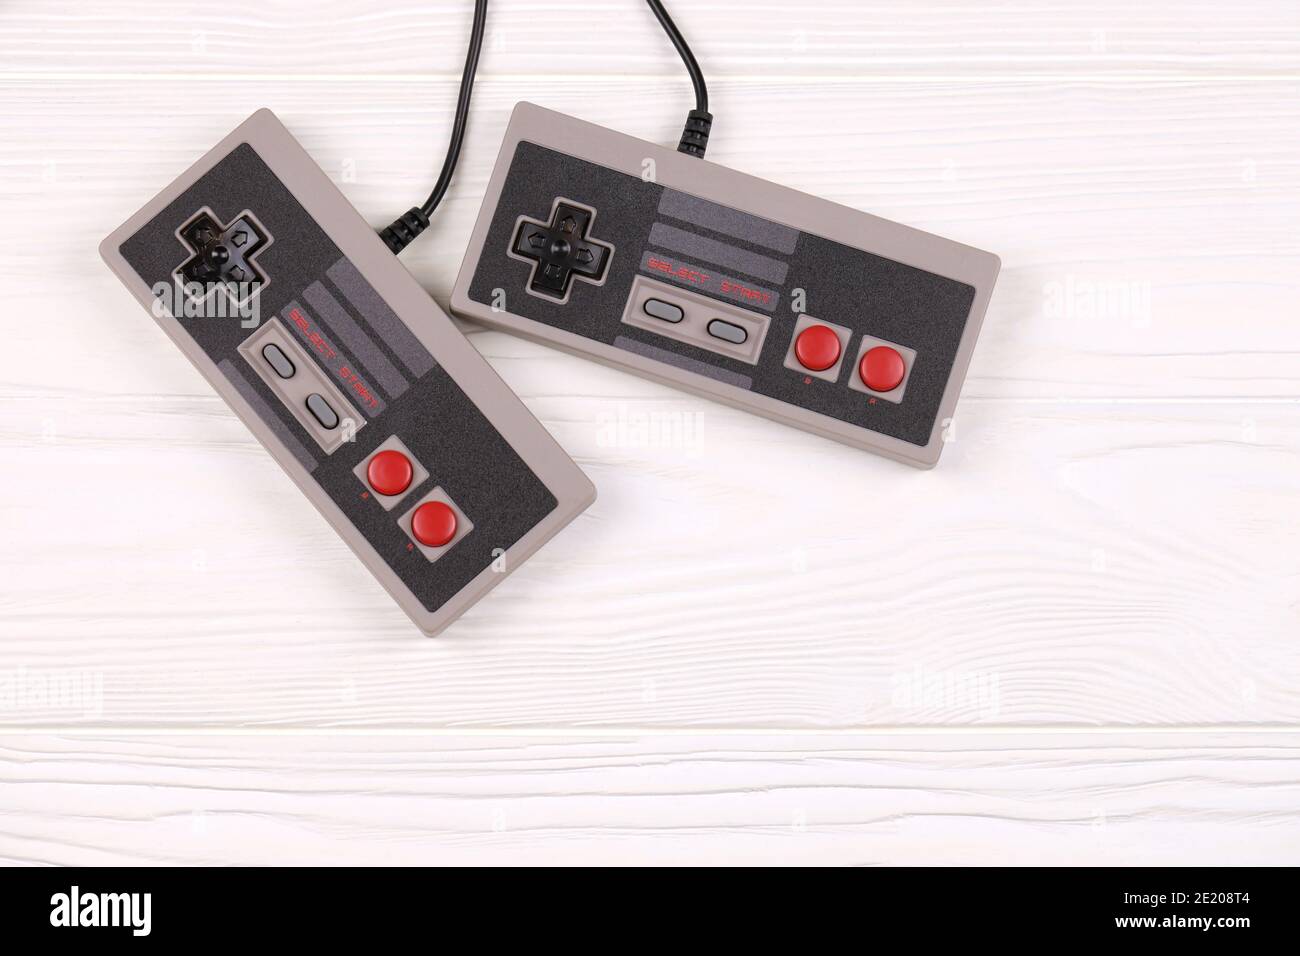 KHARKOV, UKRAINE - DECEMBER 27, 2020: Two old gamepads for 8-bit video game consoles nintendo entertainment system and nes mini on white wooden table. Stock Photo